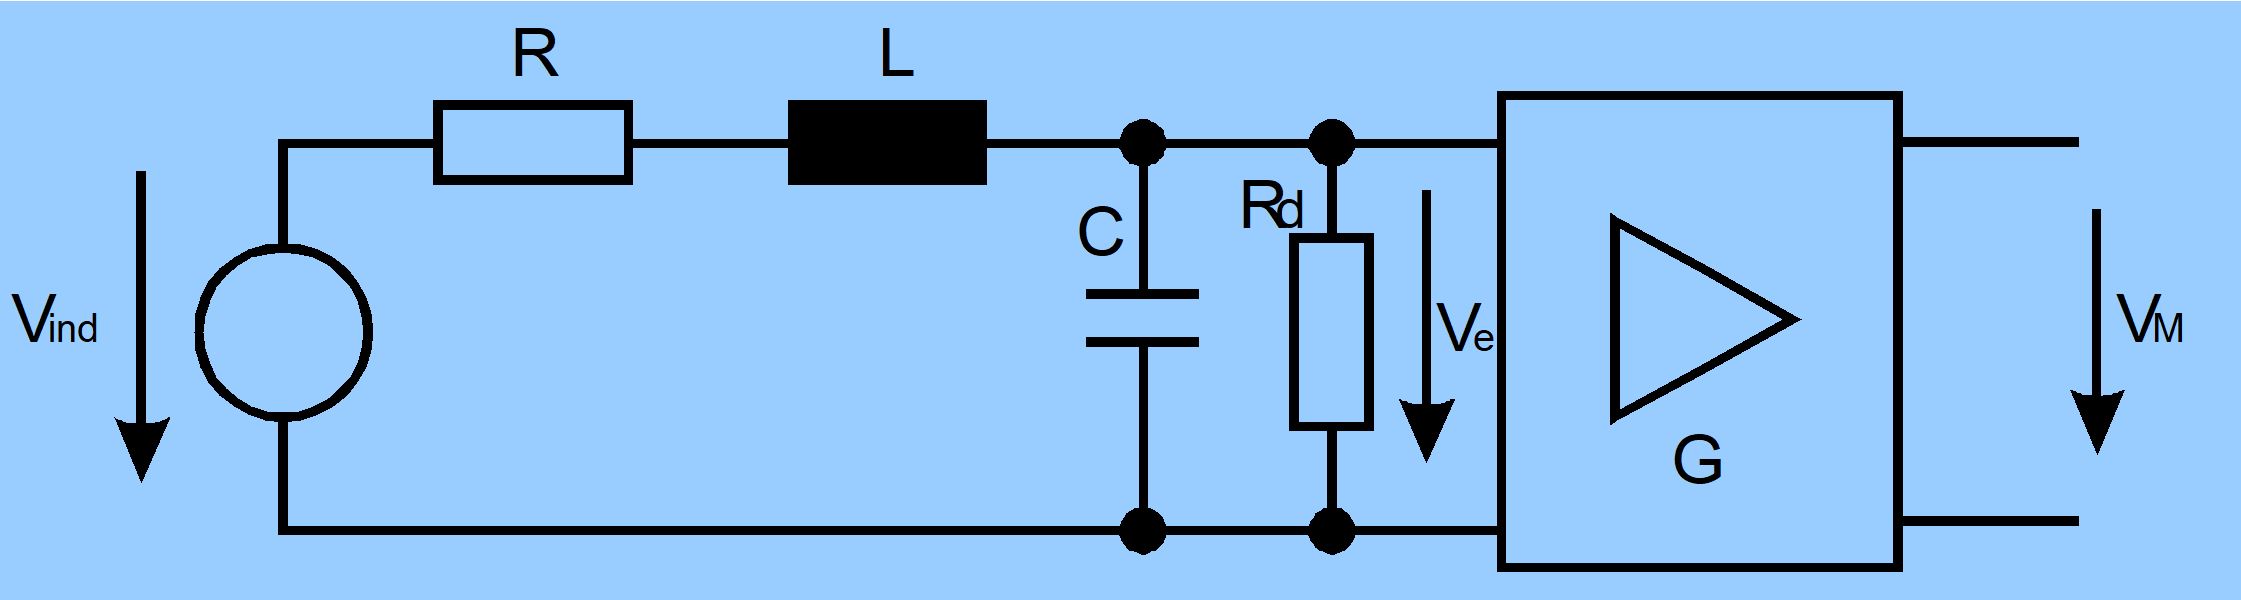 ../../_images/simplified_equivalent_circuit_diagramm_for_a_sensor_coil.jpg